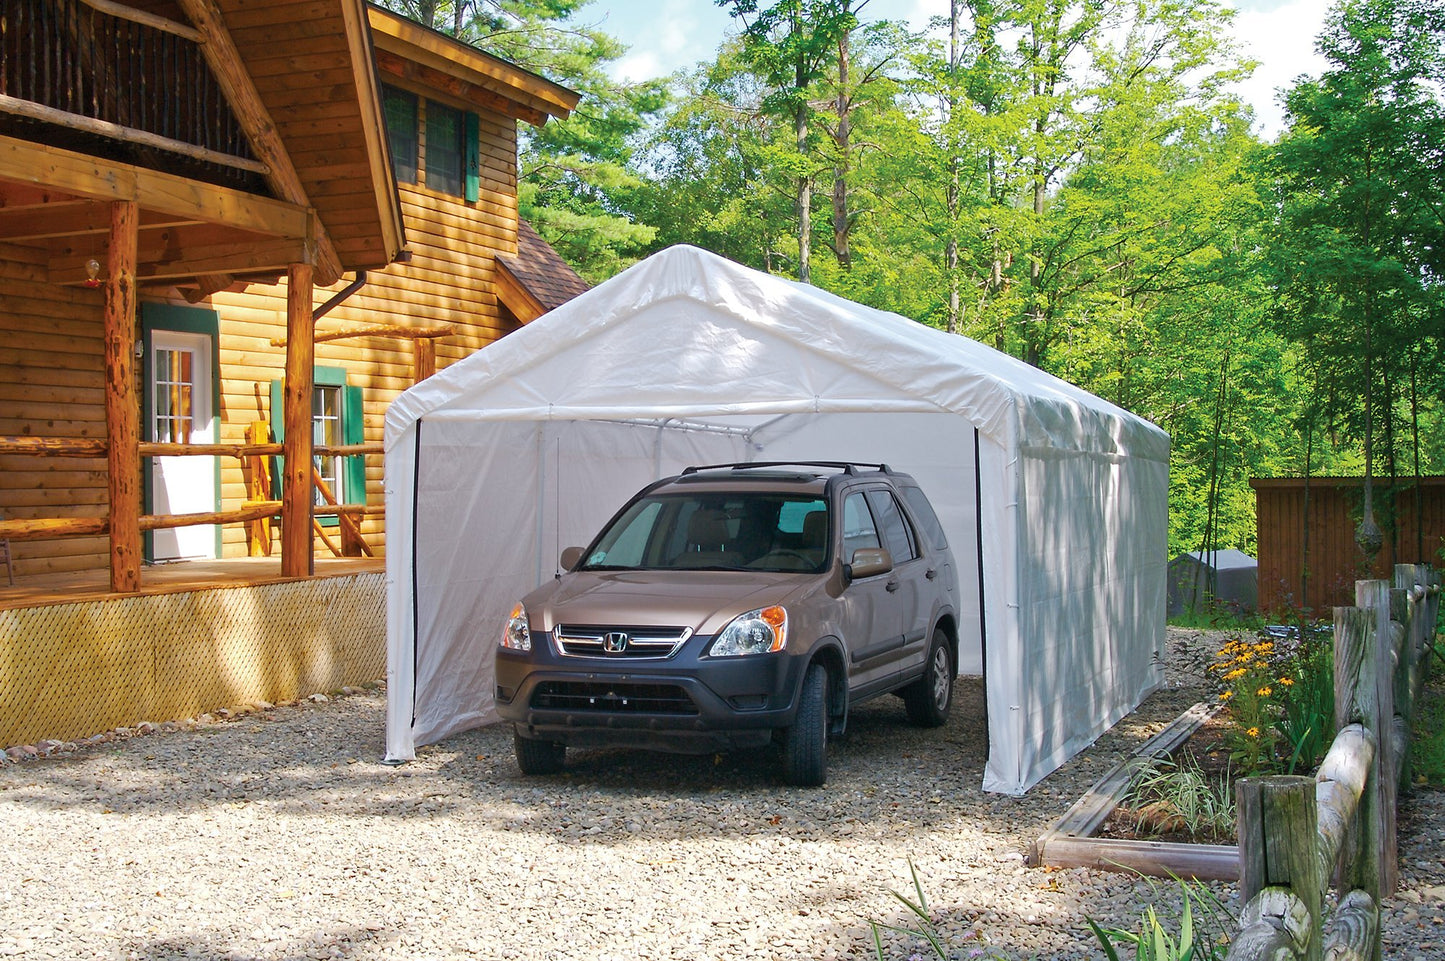 ShelterLogic 10' x 20' MaxAP Large Portable Garage 2in1 Kit Heavy-Duty Steel Frame Outdoor Canopy, Gazebo, or Carport Tent with Enclosure for Car, SUV, Truck, Boat, Tractor, White Canopy + Enclosure